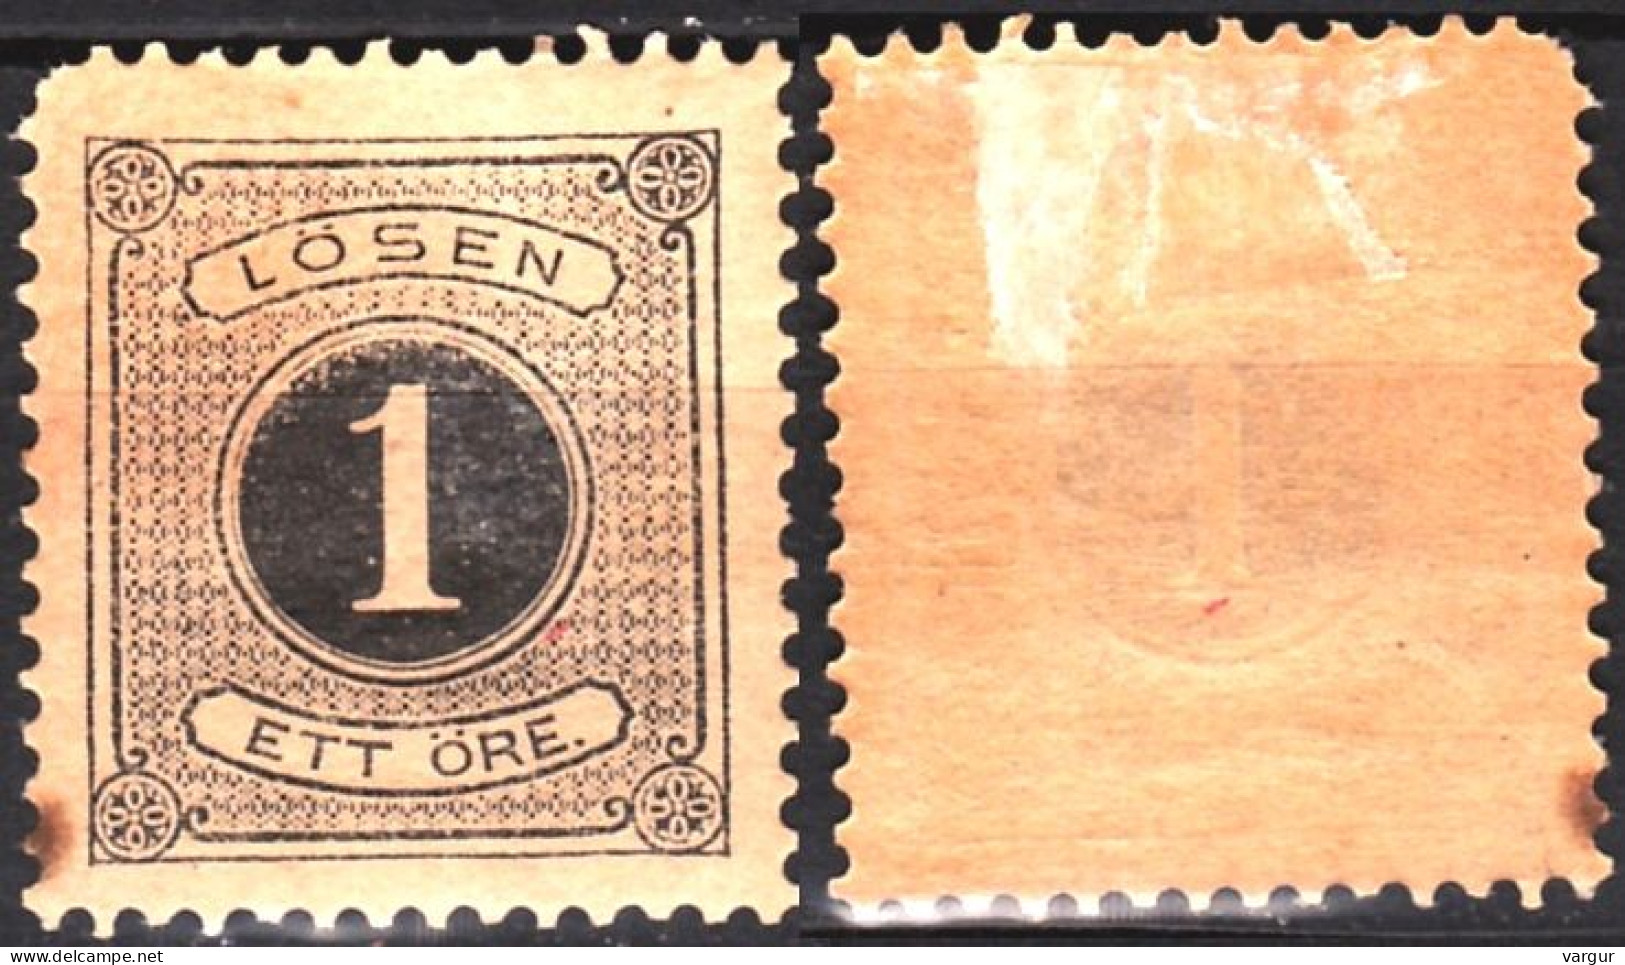 SWEDEN Postage Due 1877 Figure In Circle. 1o Black. Perf 13, MH Lot #1 - Postage Due